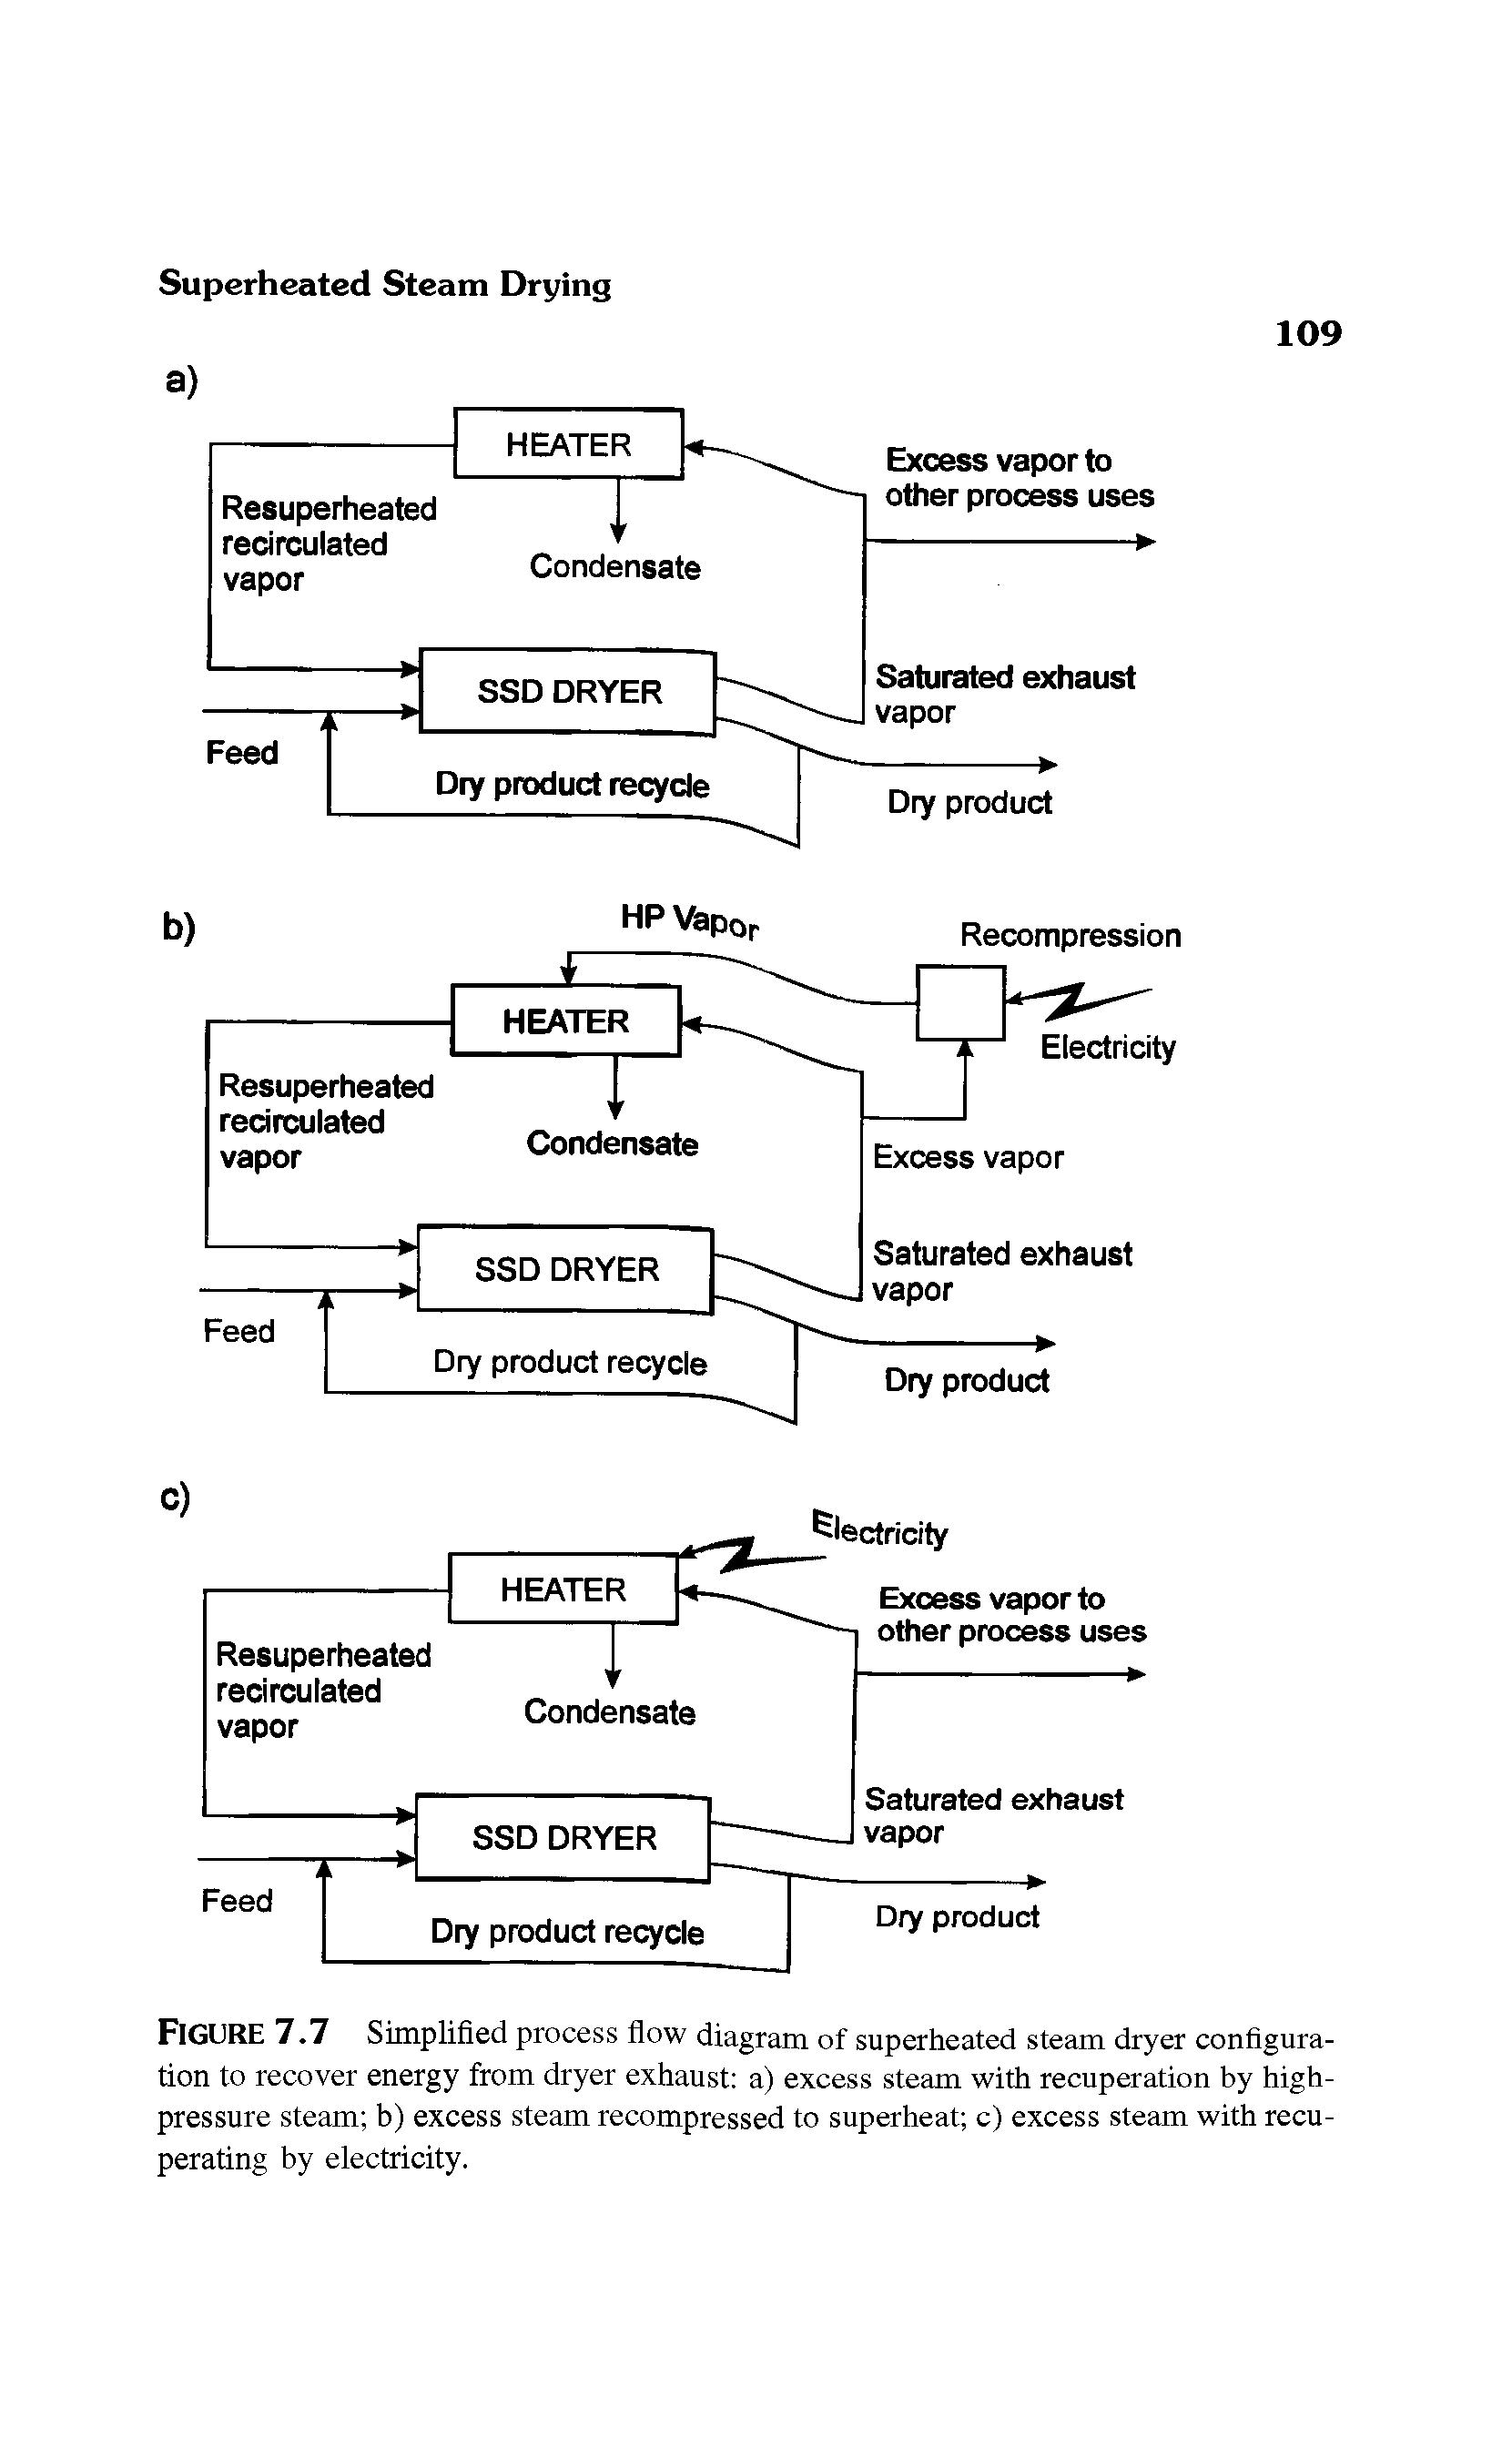 Figure 7.7 Simplified process flow diagram of superheated steam dryer configuration to recover energy from dryer exhaust a) excess steam with recuperation by high-pressure steam b) excess steam recompressed to superheat c) excess steam with recuperating by electricity.